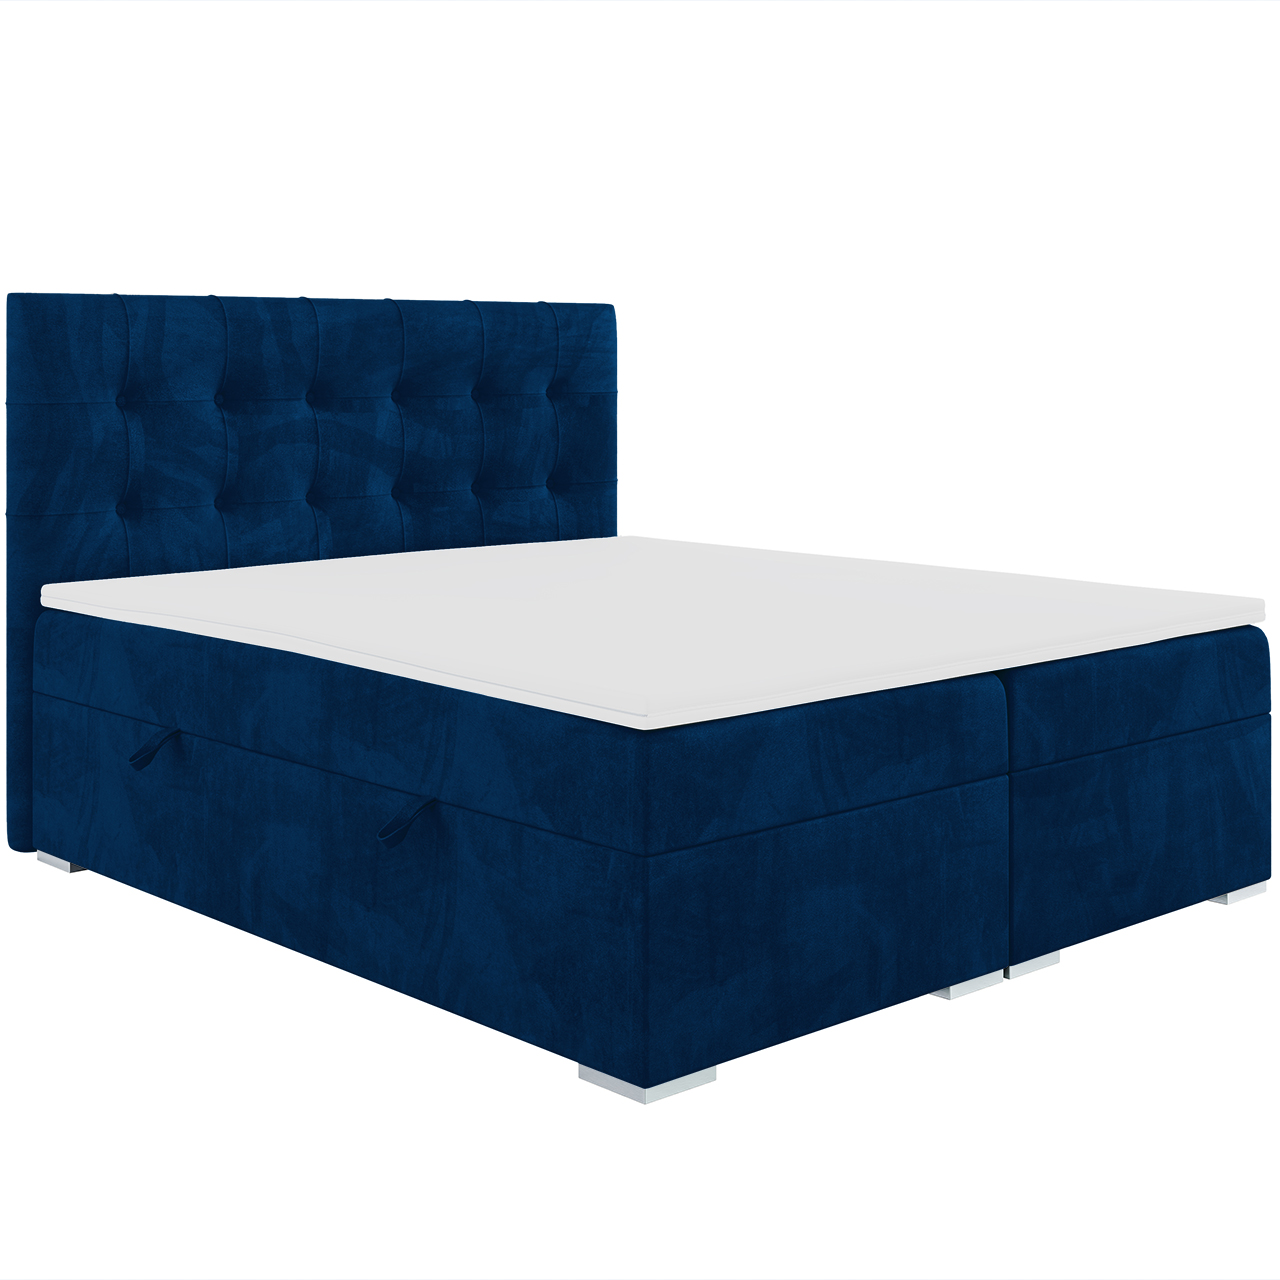 Upholstered bed CARLO 120x200 riviera 81